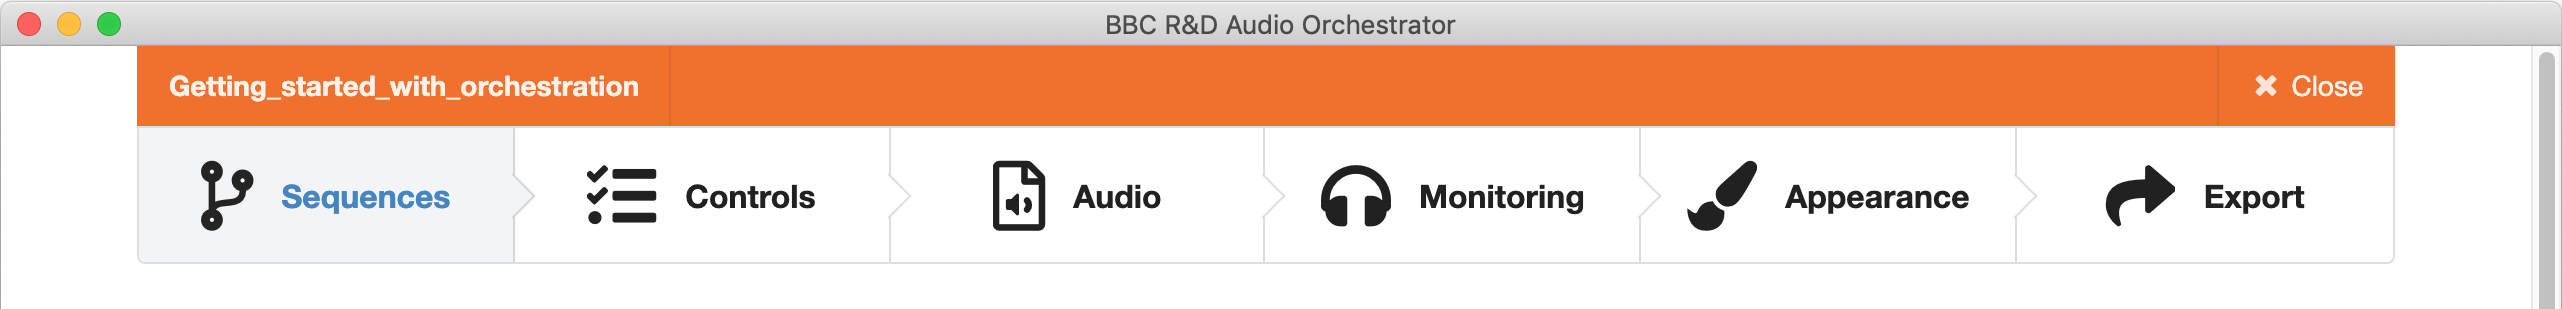 Screenshot of the Audio Orchestrator page menu bar, showing buttons to navigate to each of the Audio Orchestrator pages